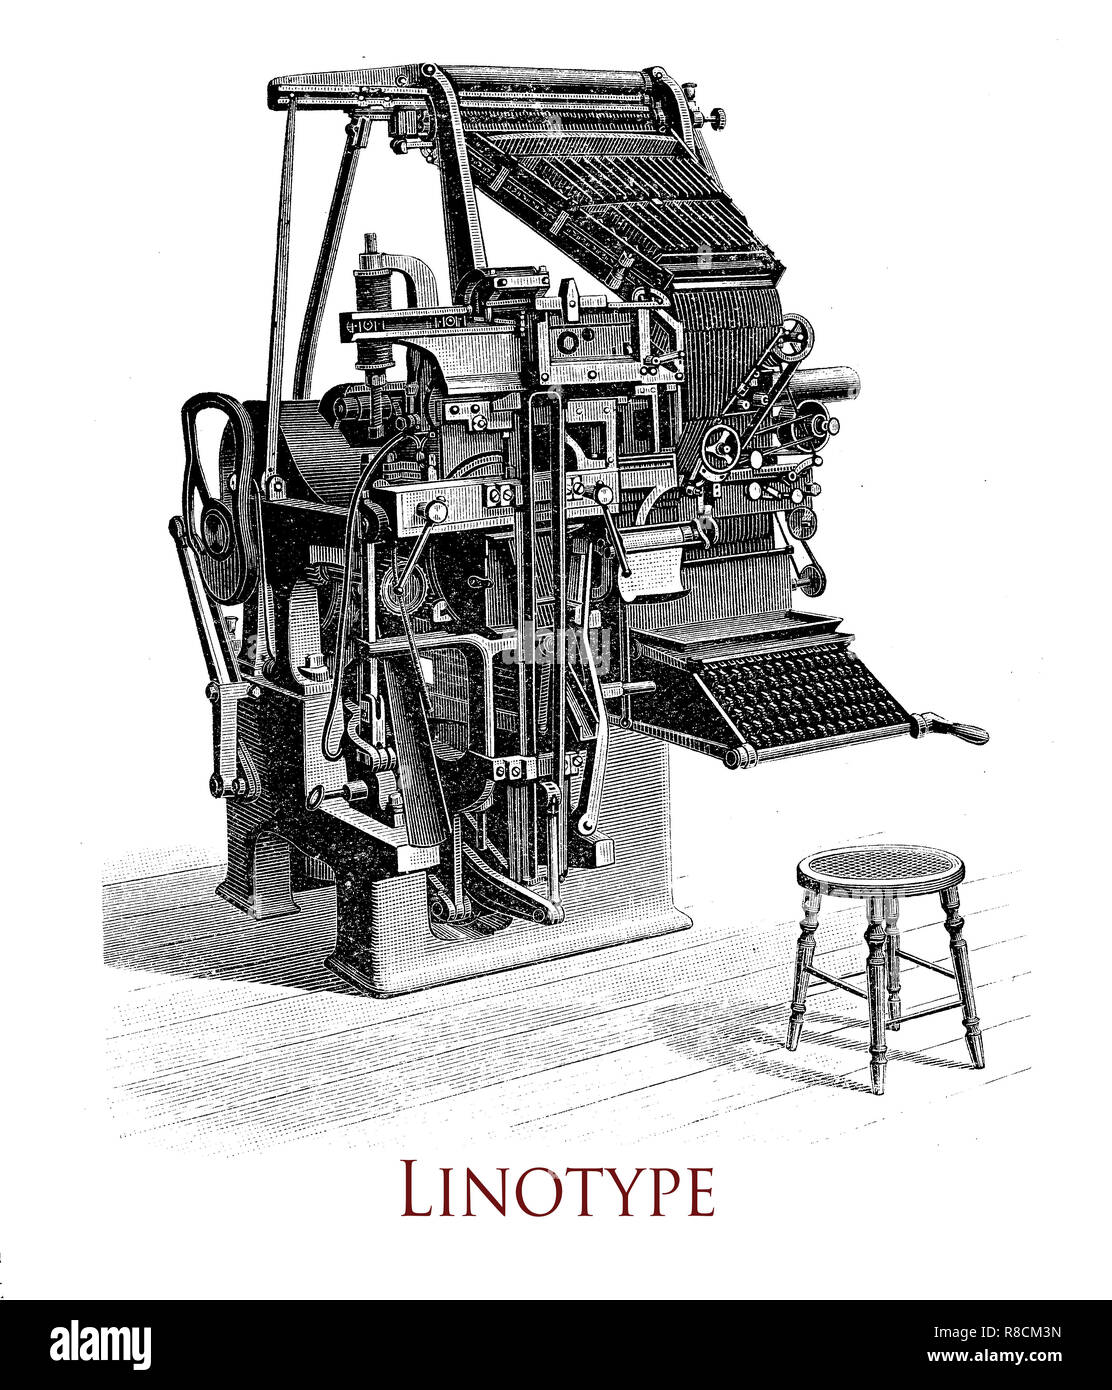 Vintage engraving of  Linotype printing machine, it produces an entire line of metal type at once, significative improvement over the previous industry standard of  manual  letter-by-letter typesetting Stock Photo